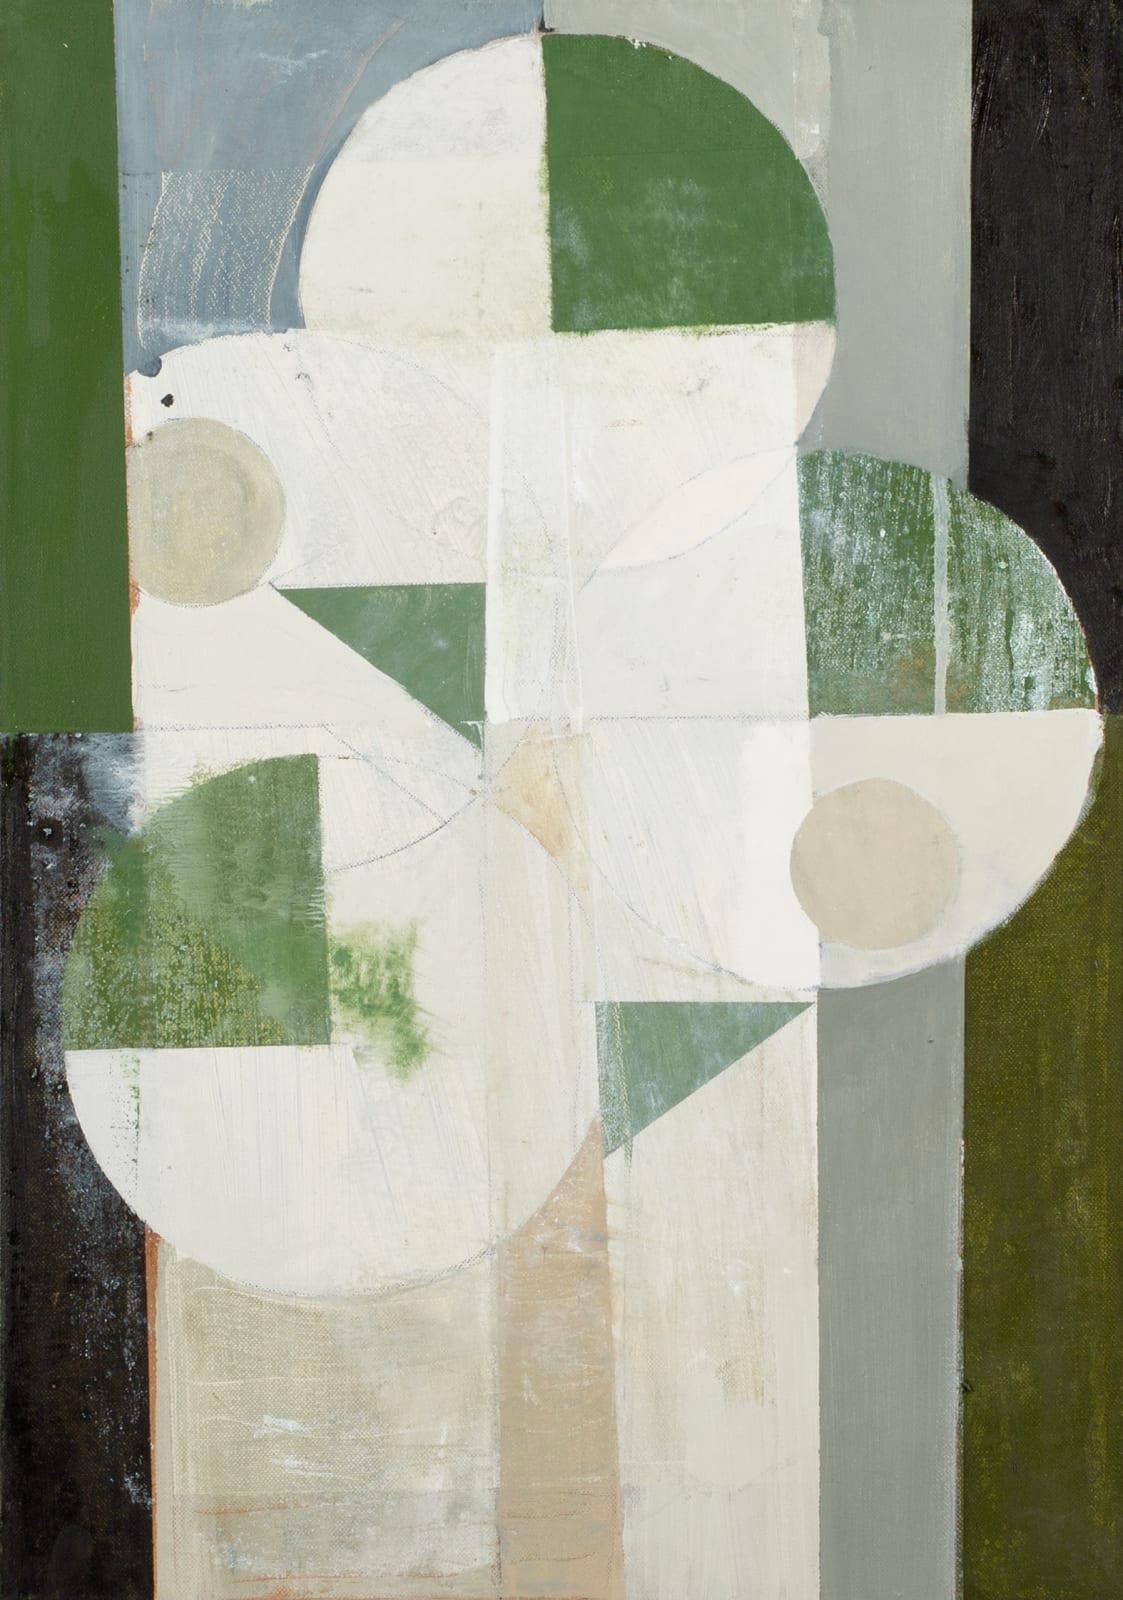 Tree with Greens II Painting by Daisy Cook B. 1965, 2021

Additional information:
Medium: Oil on canvas
Dimensions: 59.5 x 42 cm
23 3/8 x 16 1/2 in

Daisy Cook is a British painter of landscape and still life.

Cook creates abstracted paintings that